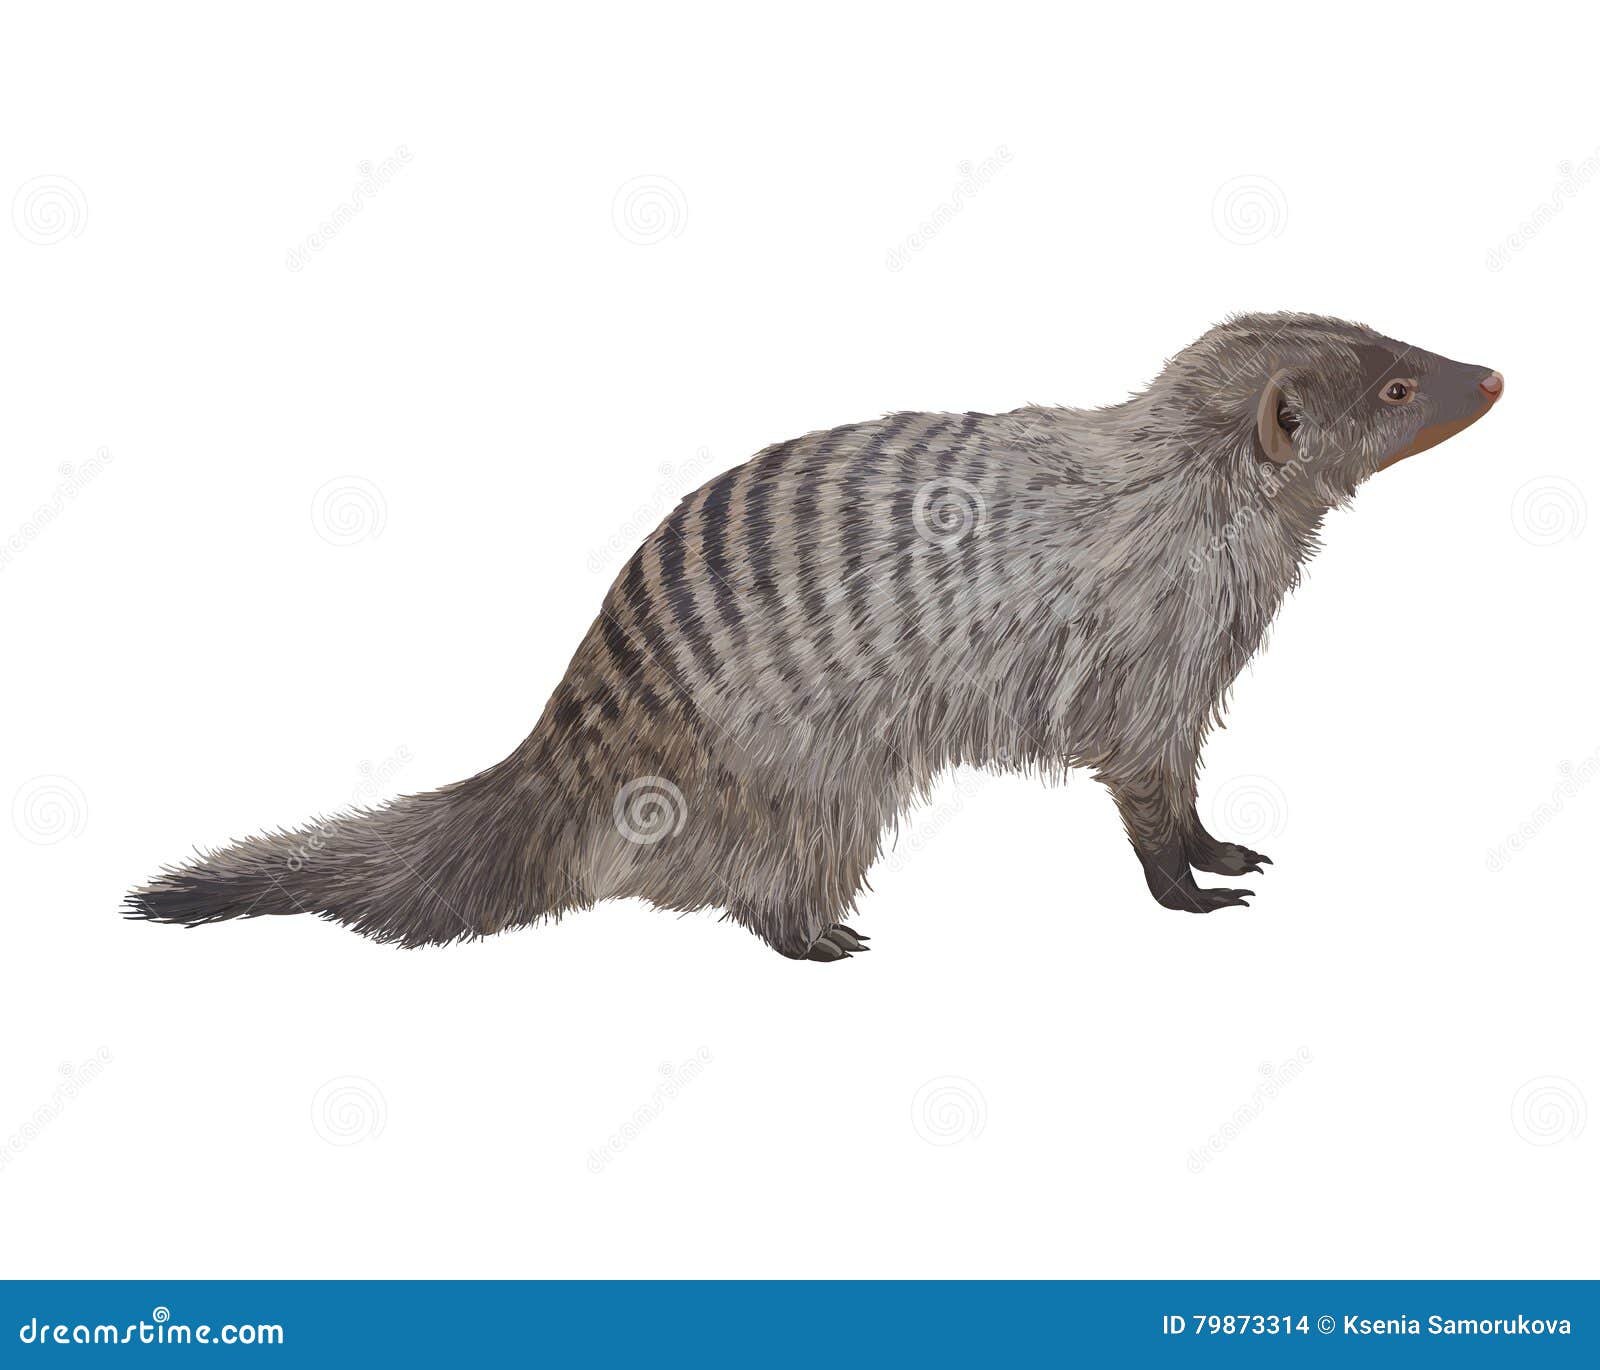 striped mongoose. realistic detailed 